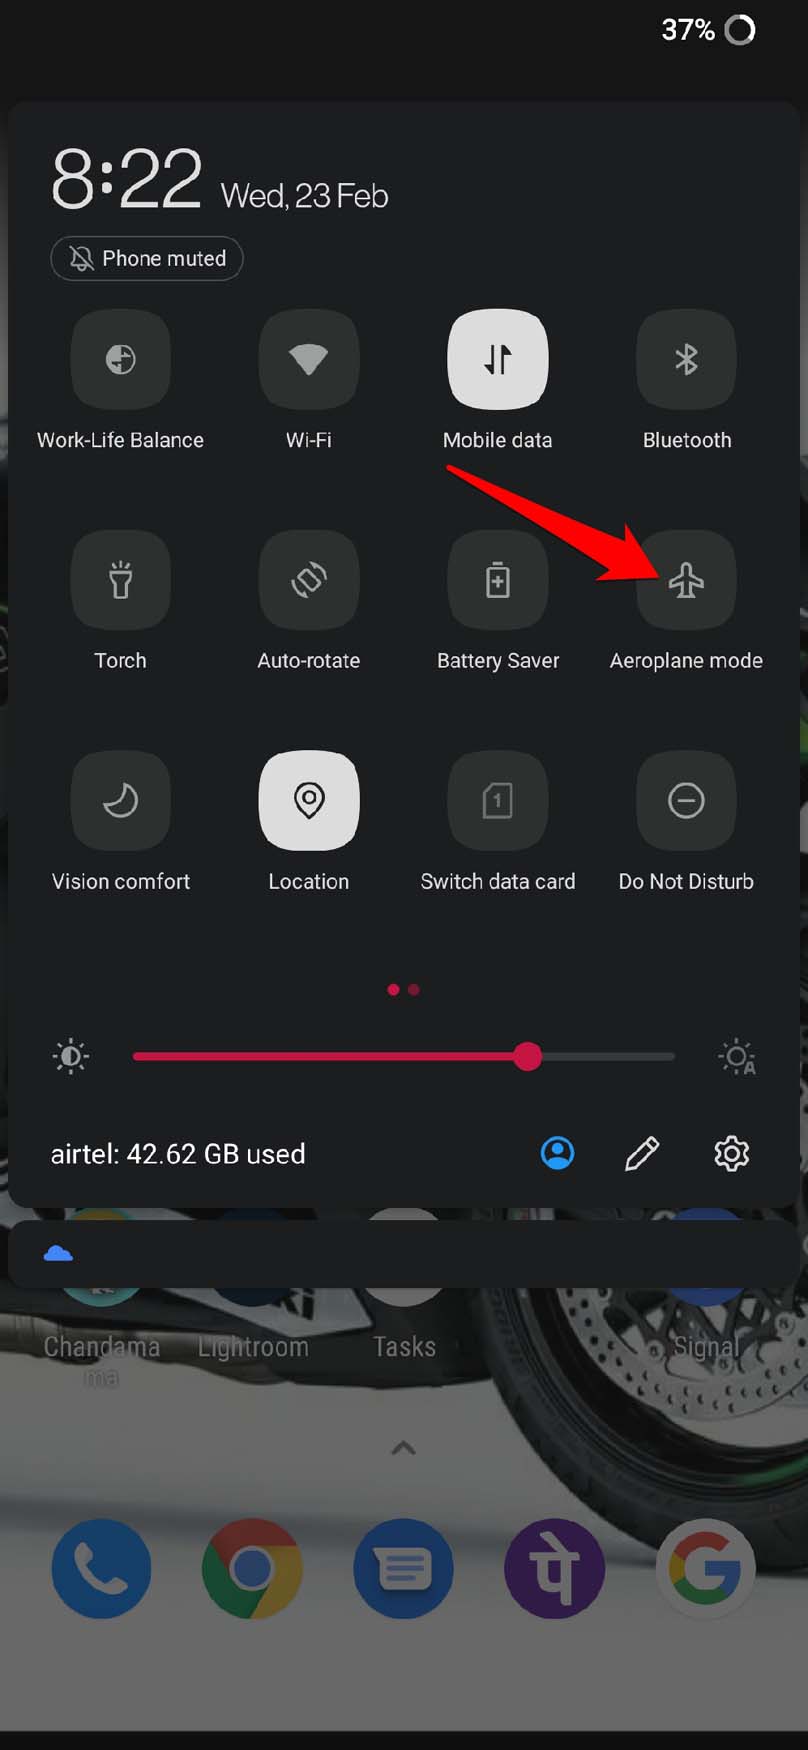 enable flight mode on Android